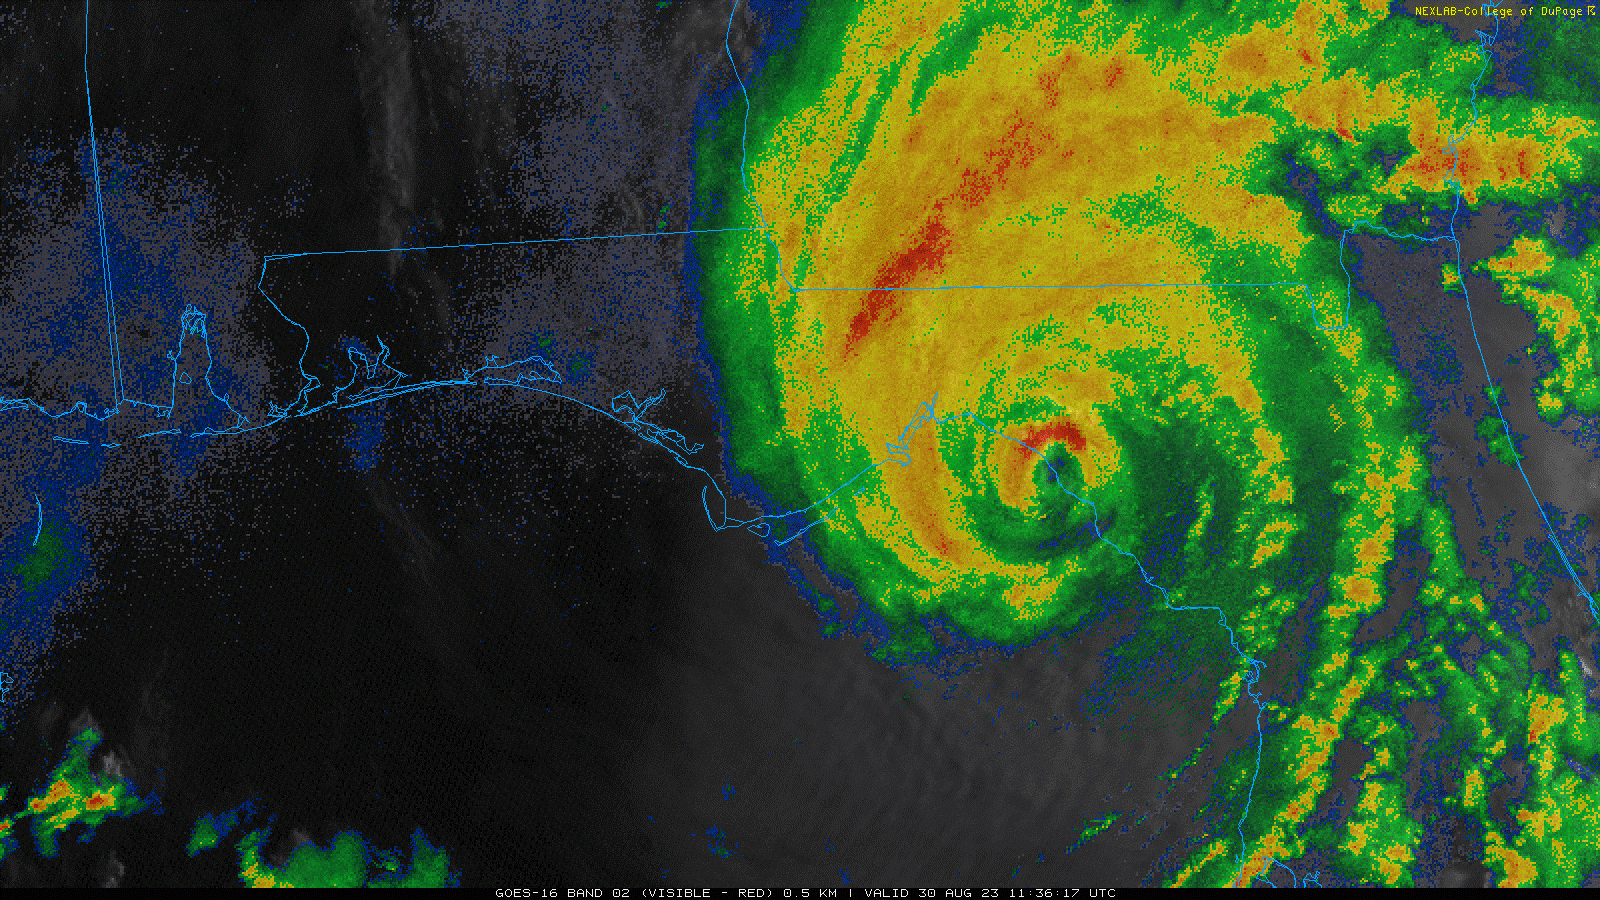 Radar image at 7:36AM EDT just prior to landfall. Source: College of DuPage